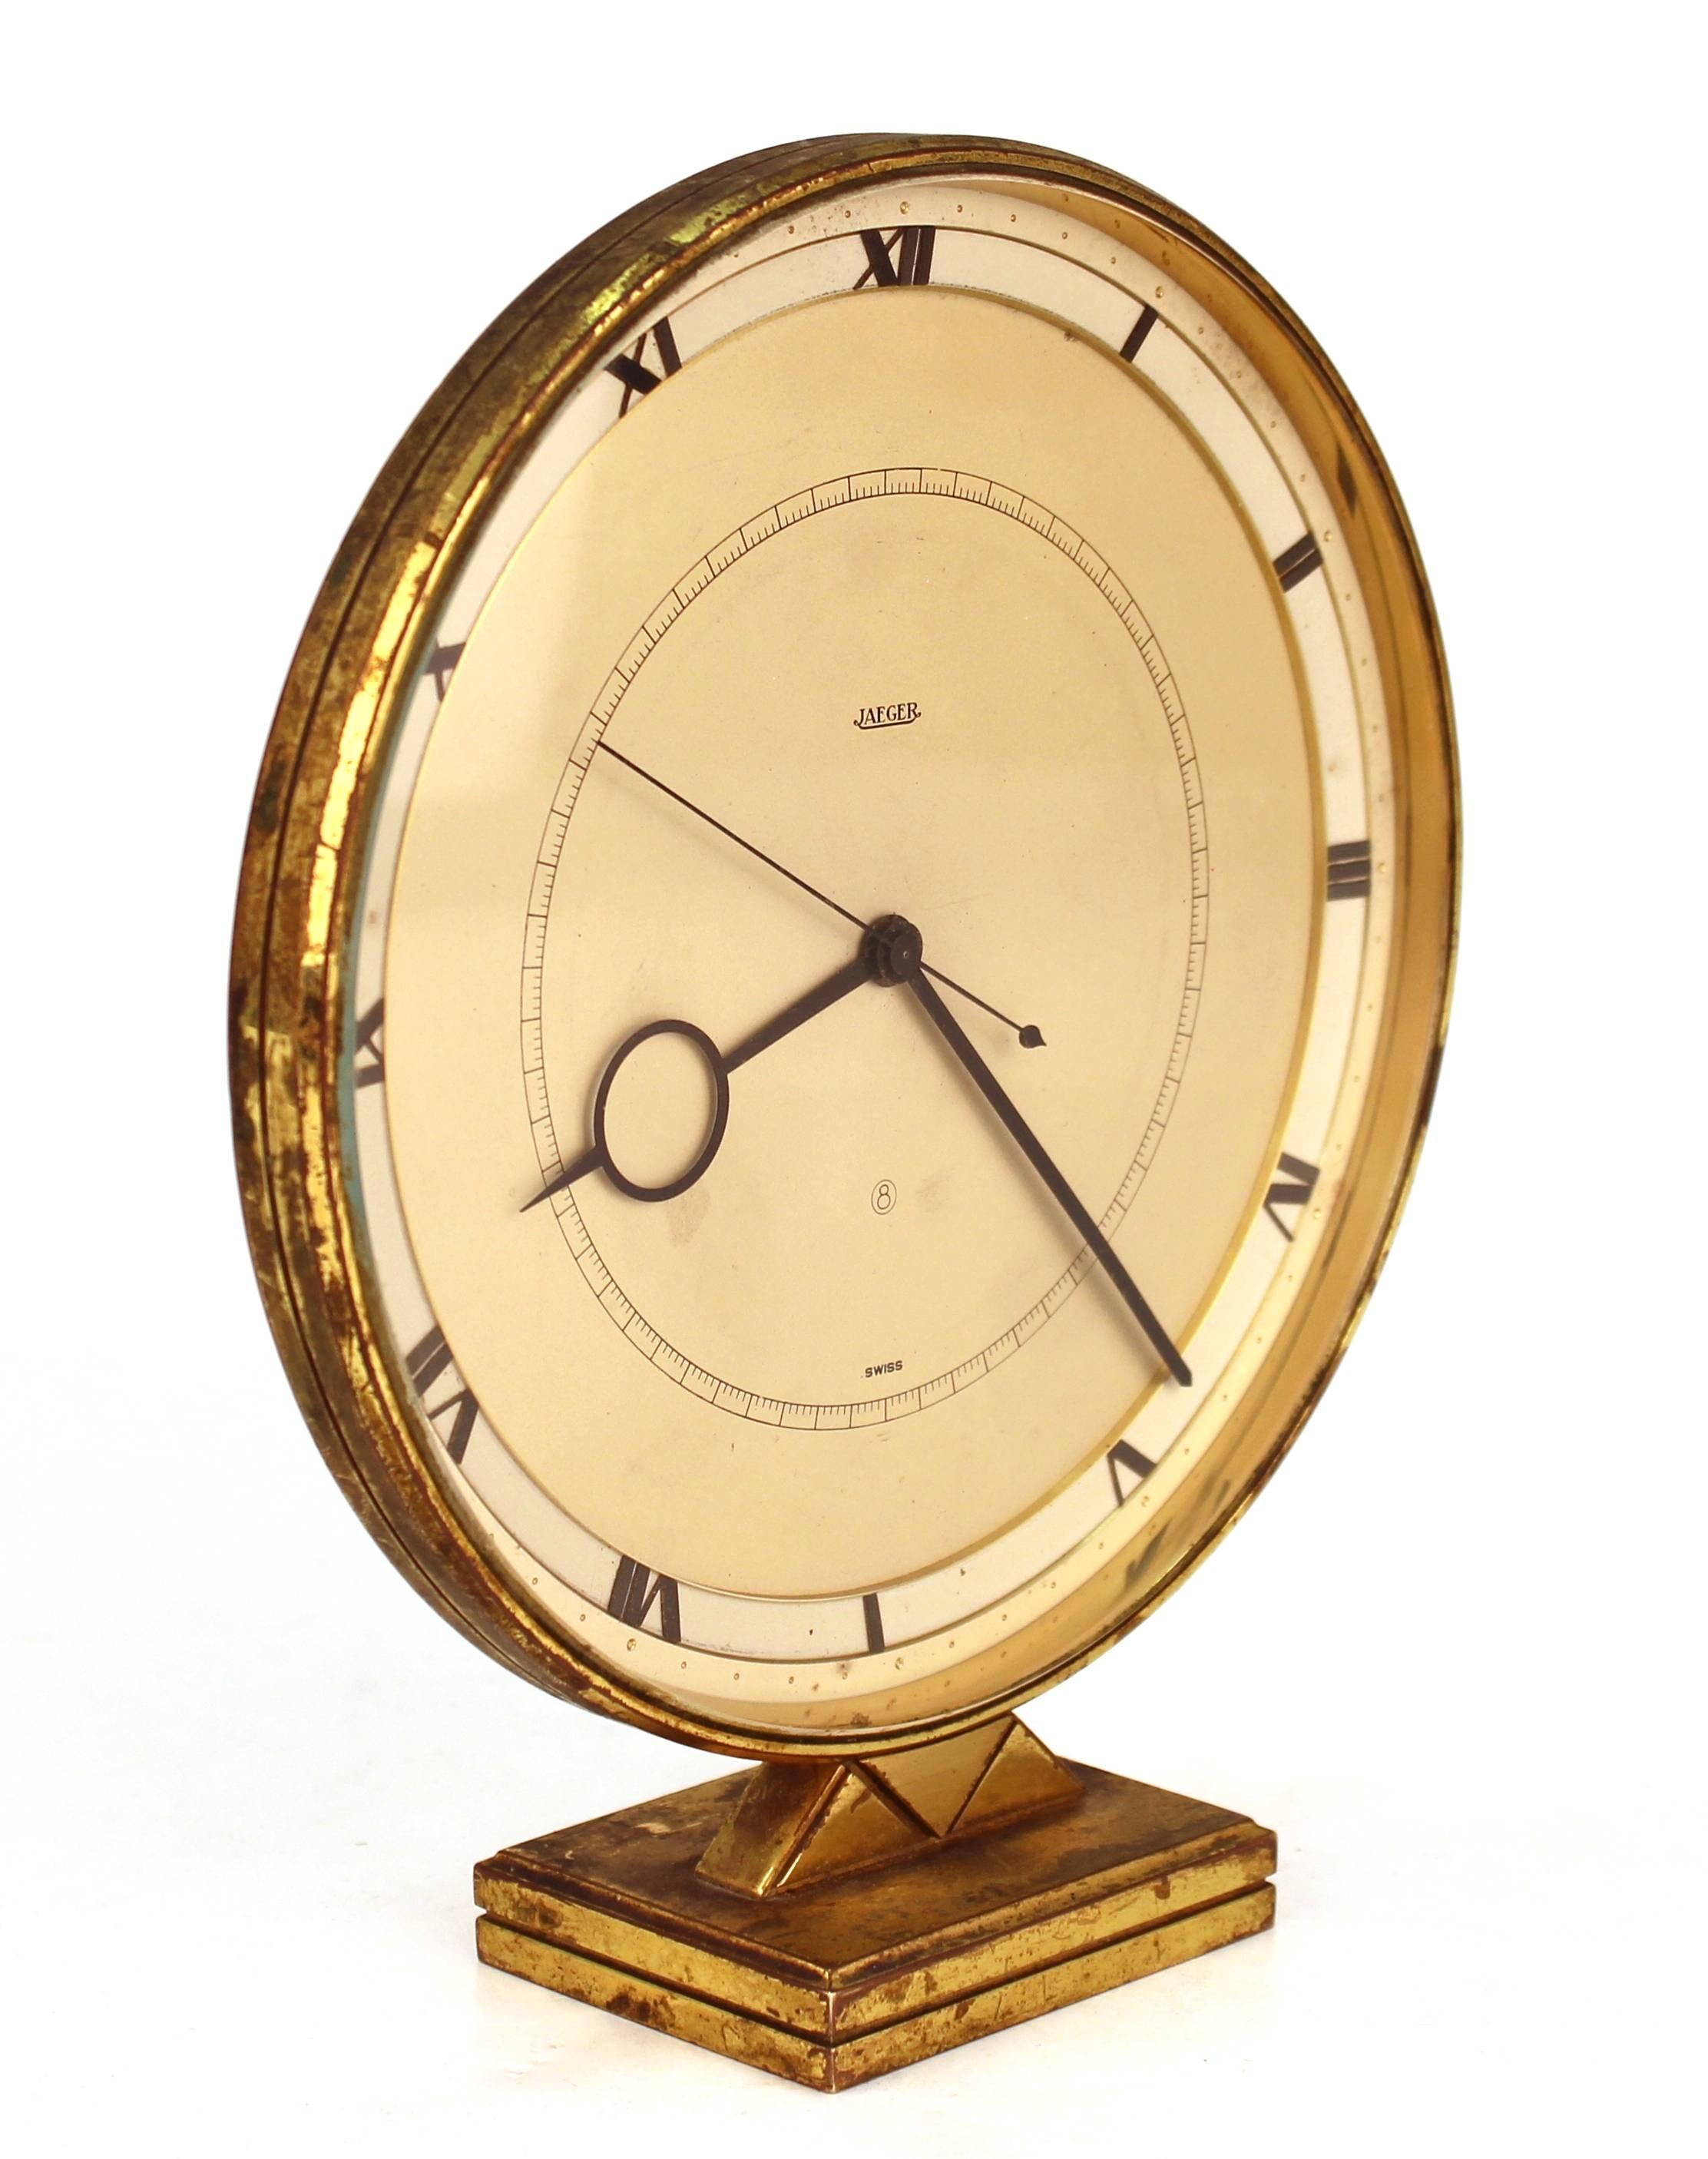 Jaeger-LeCoultre table or desk clock dating in the Art Deco style from 1920s-1930s Switzerland. Features a round face set into a brass frame with a triangular Deco pattern stand and rectangle base. The piece runs perfectly without rewinding for five